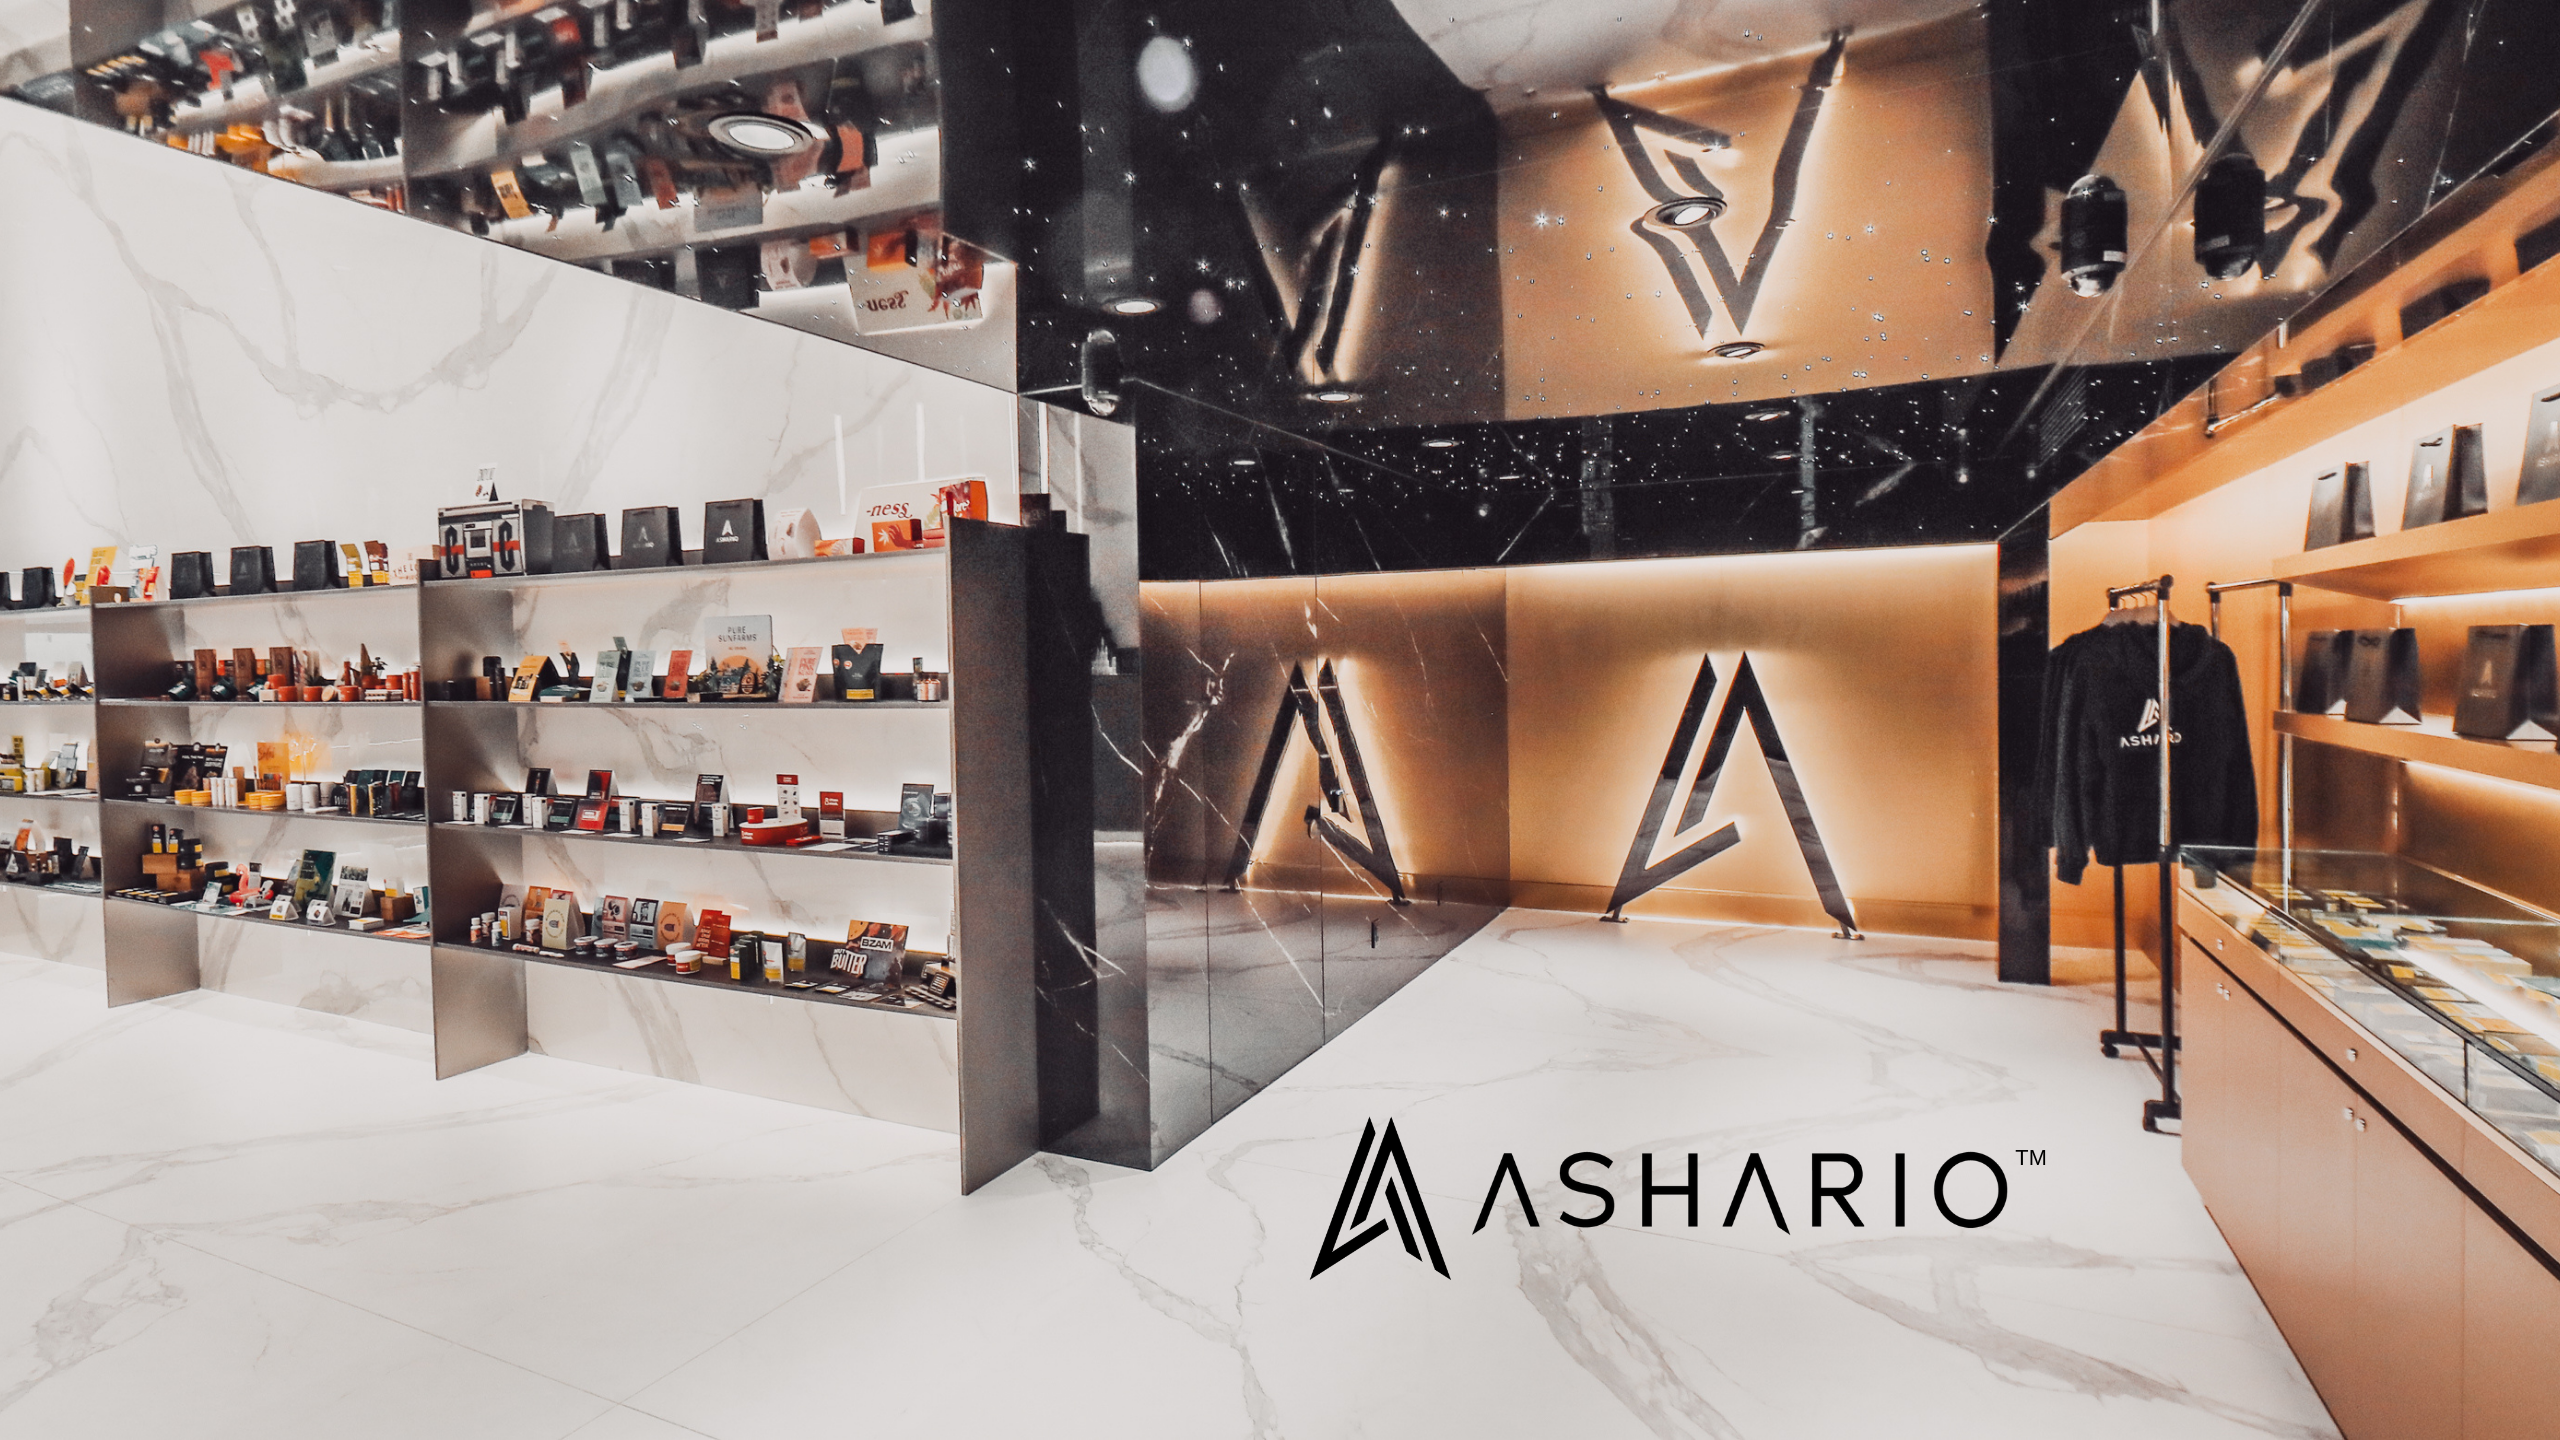 Looking for a cannabis store near Dufferin and Finch? Look no further than Ashario Cannabis. Conveniently located in North York, our store offers a wide selection of premium cannabis products to meet your needs.